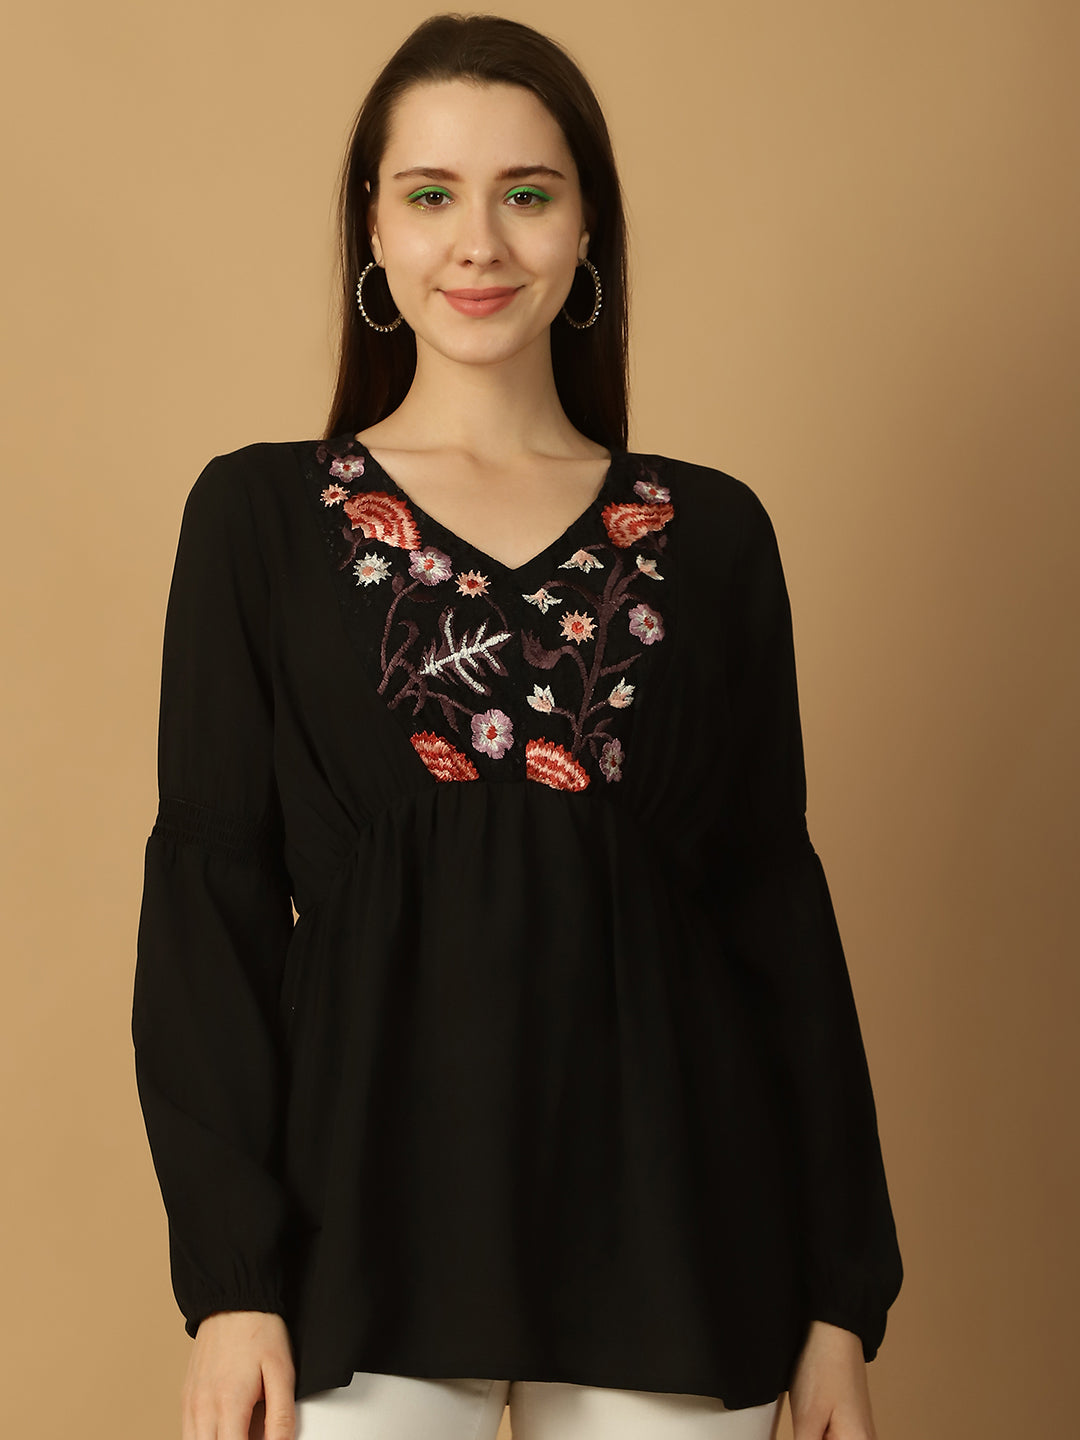 Embroidered Black Empire Top